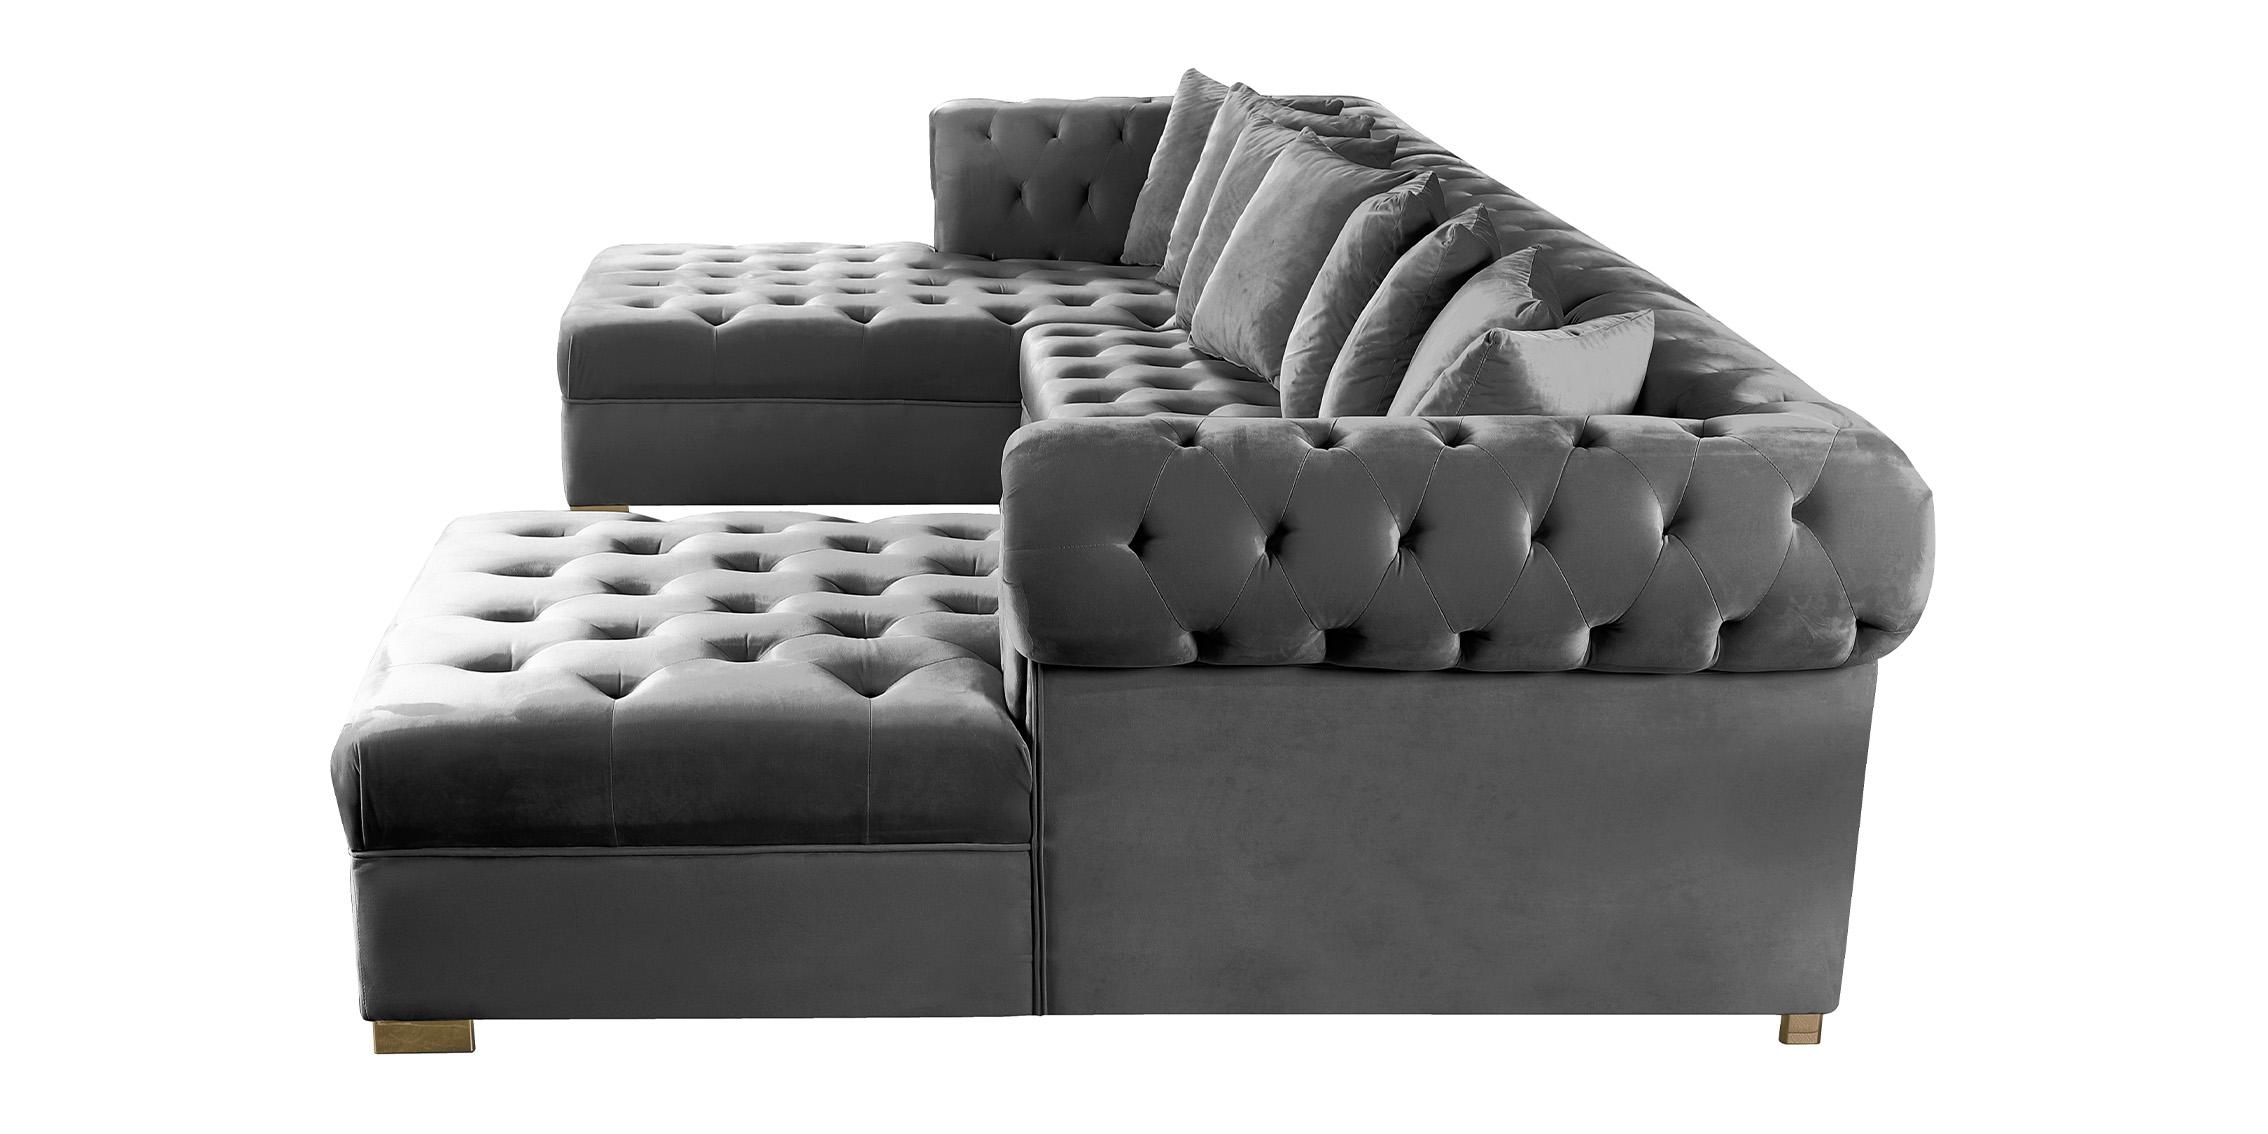 

    
Meridian Furniture PRESLEY 698Grey-Sectional Sectional Sofa Gray 698Grey-Sectional
